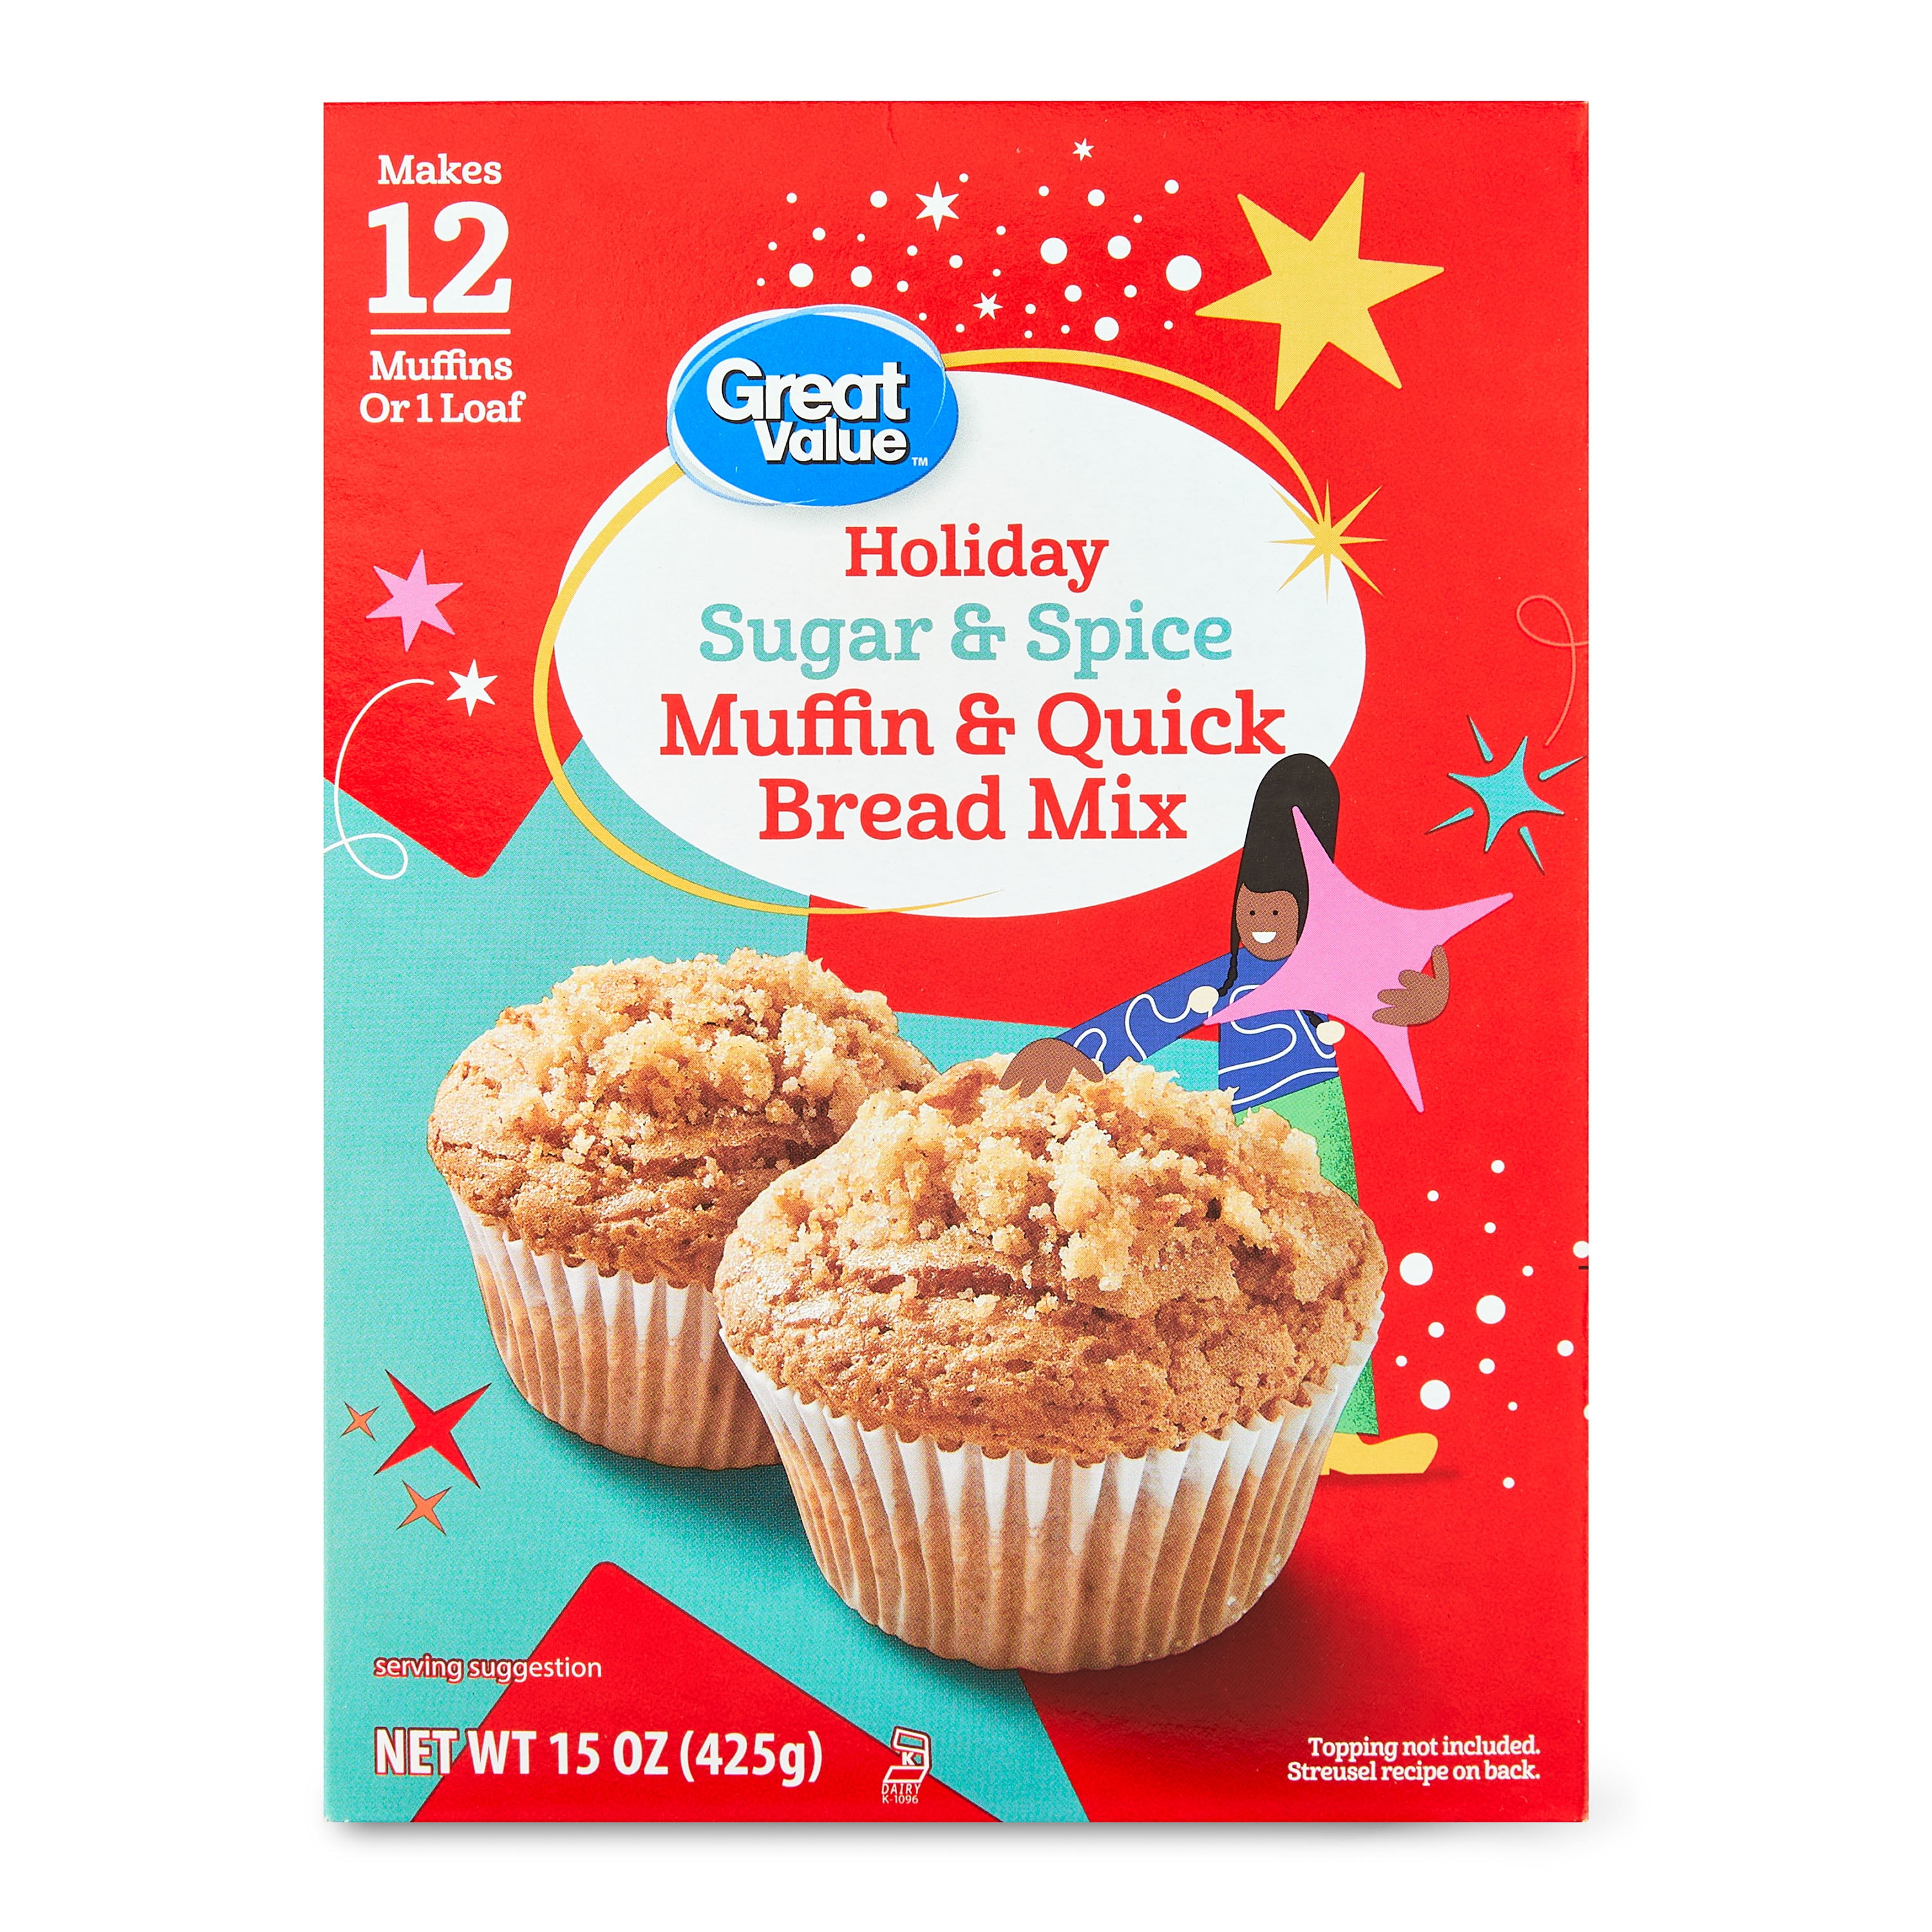 Great Value Holiday Sugar & Spice Muffin and Quick Bread Mix, 15 oz